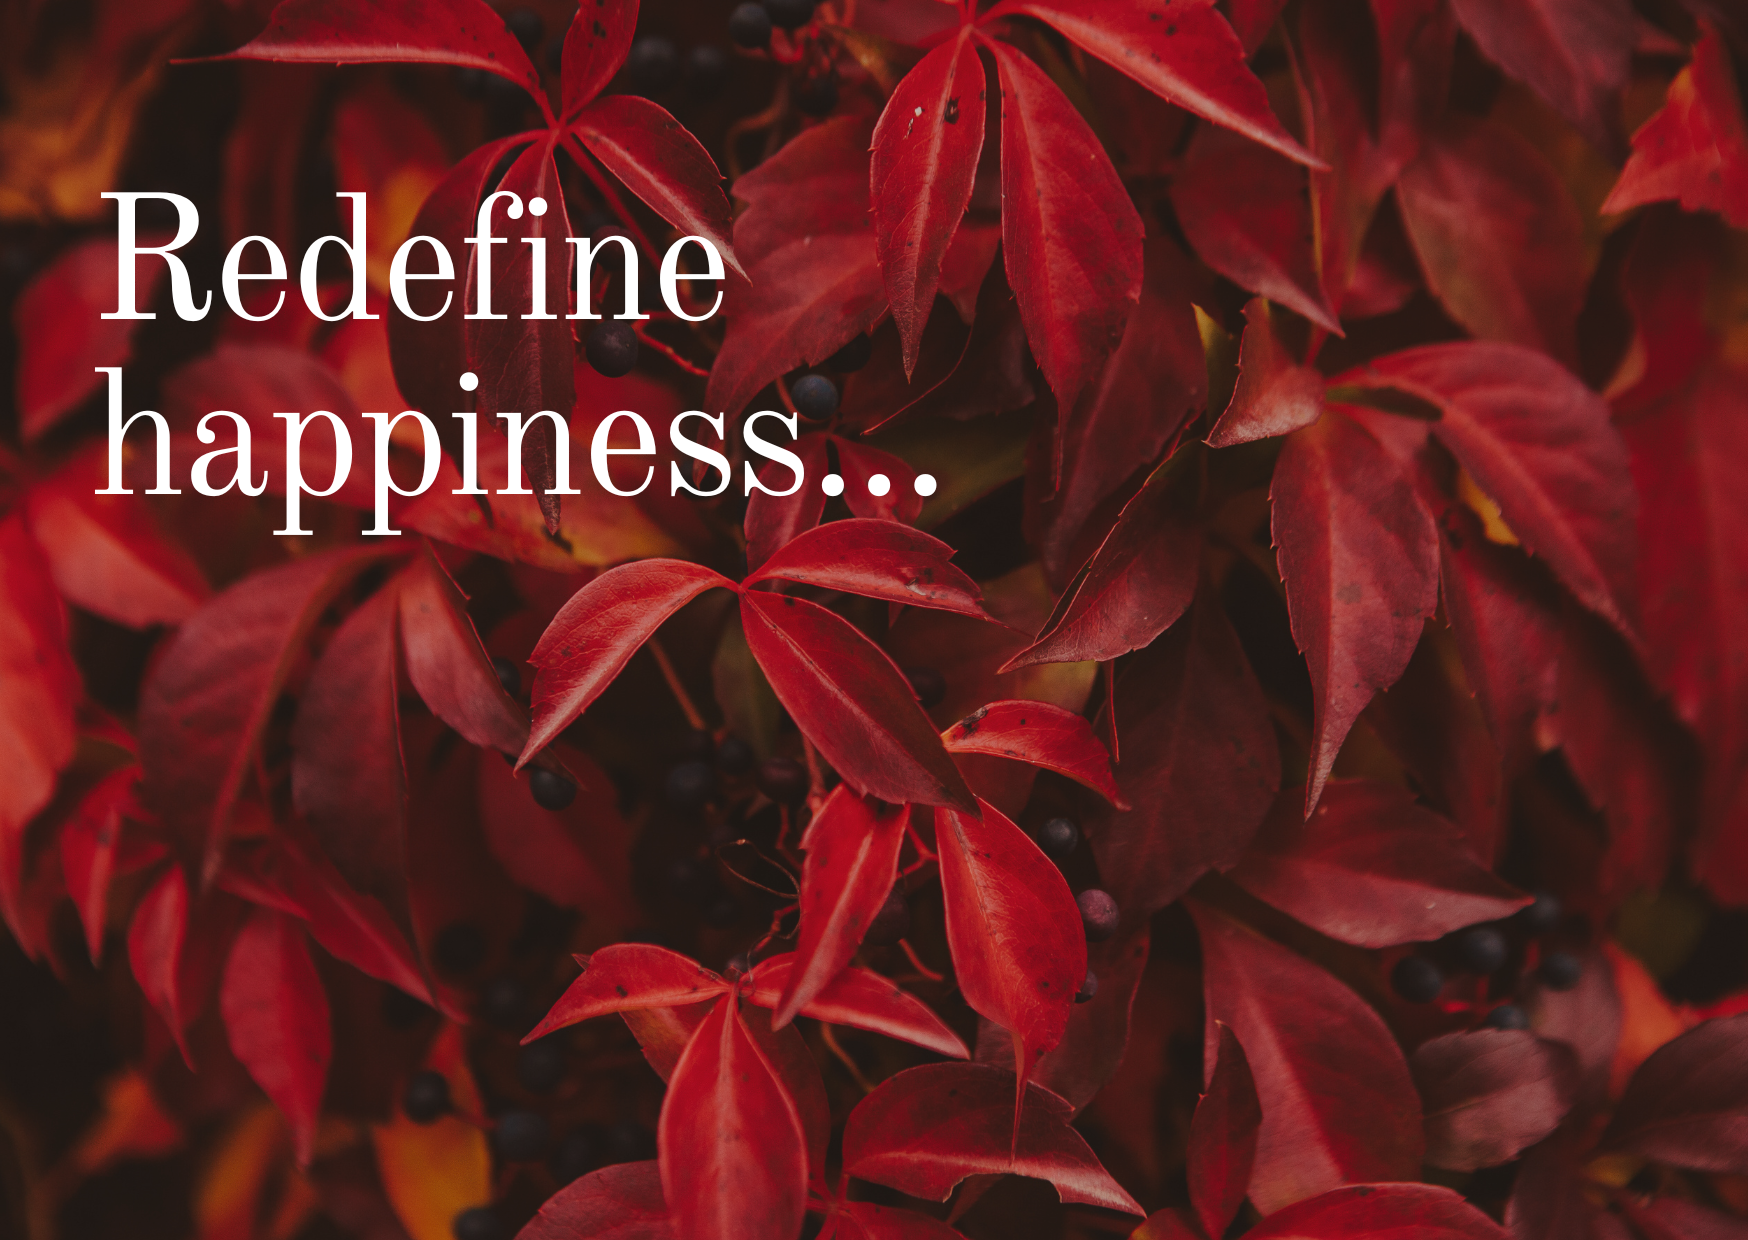 Improve your mood by redefining happiness